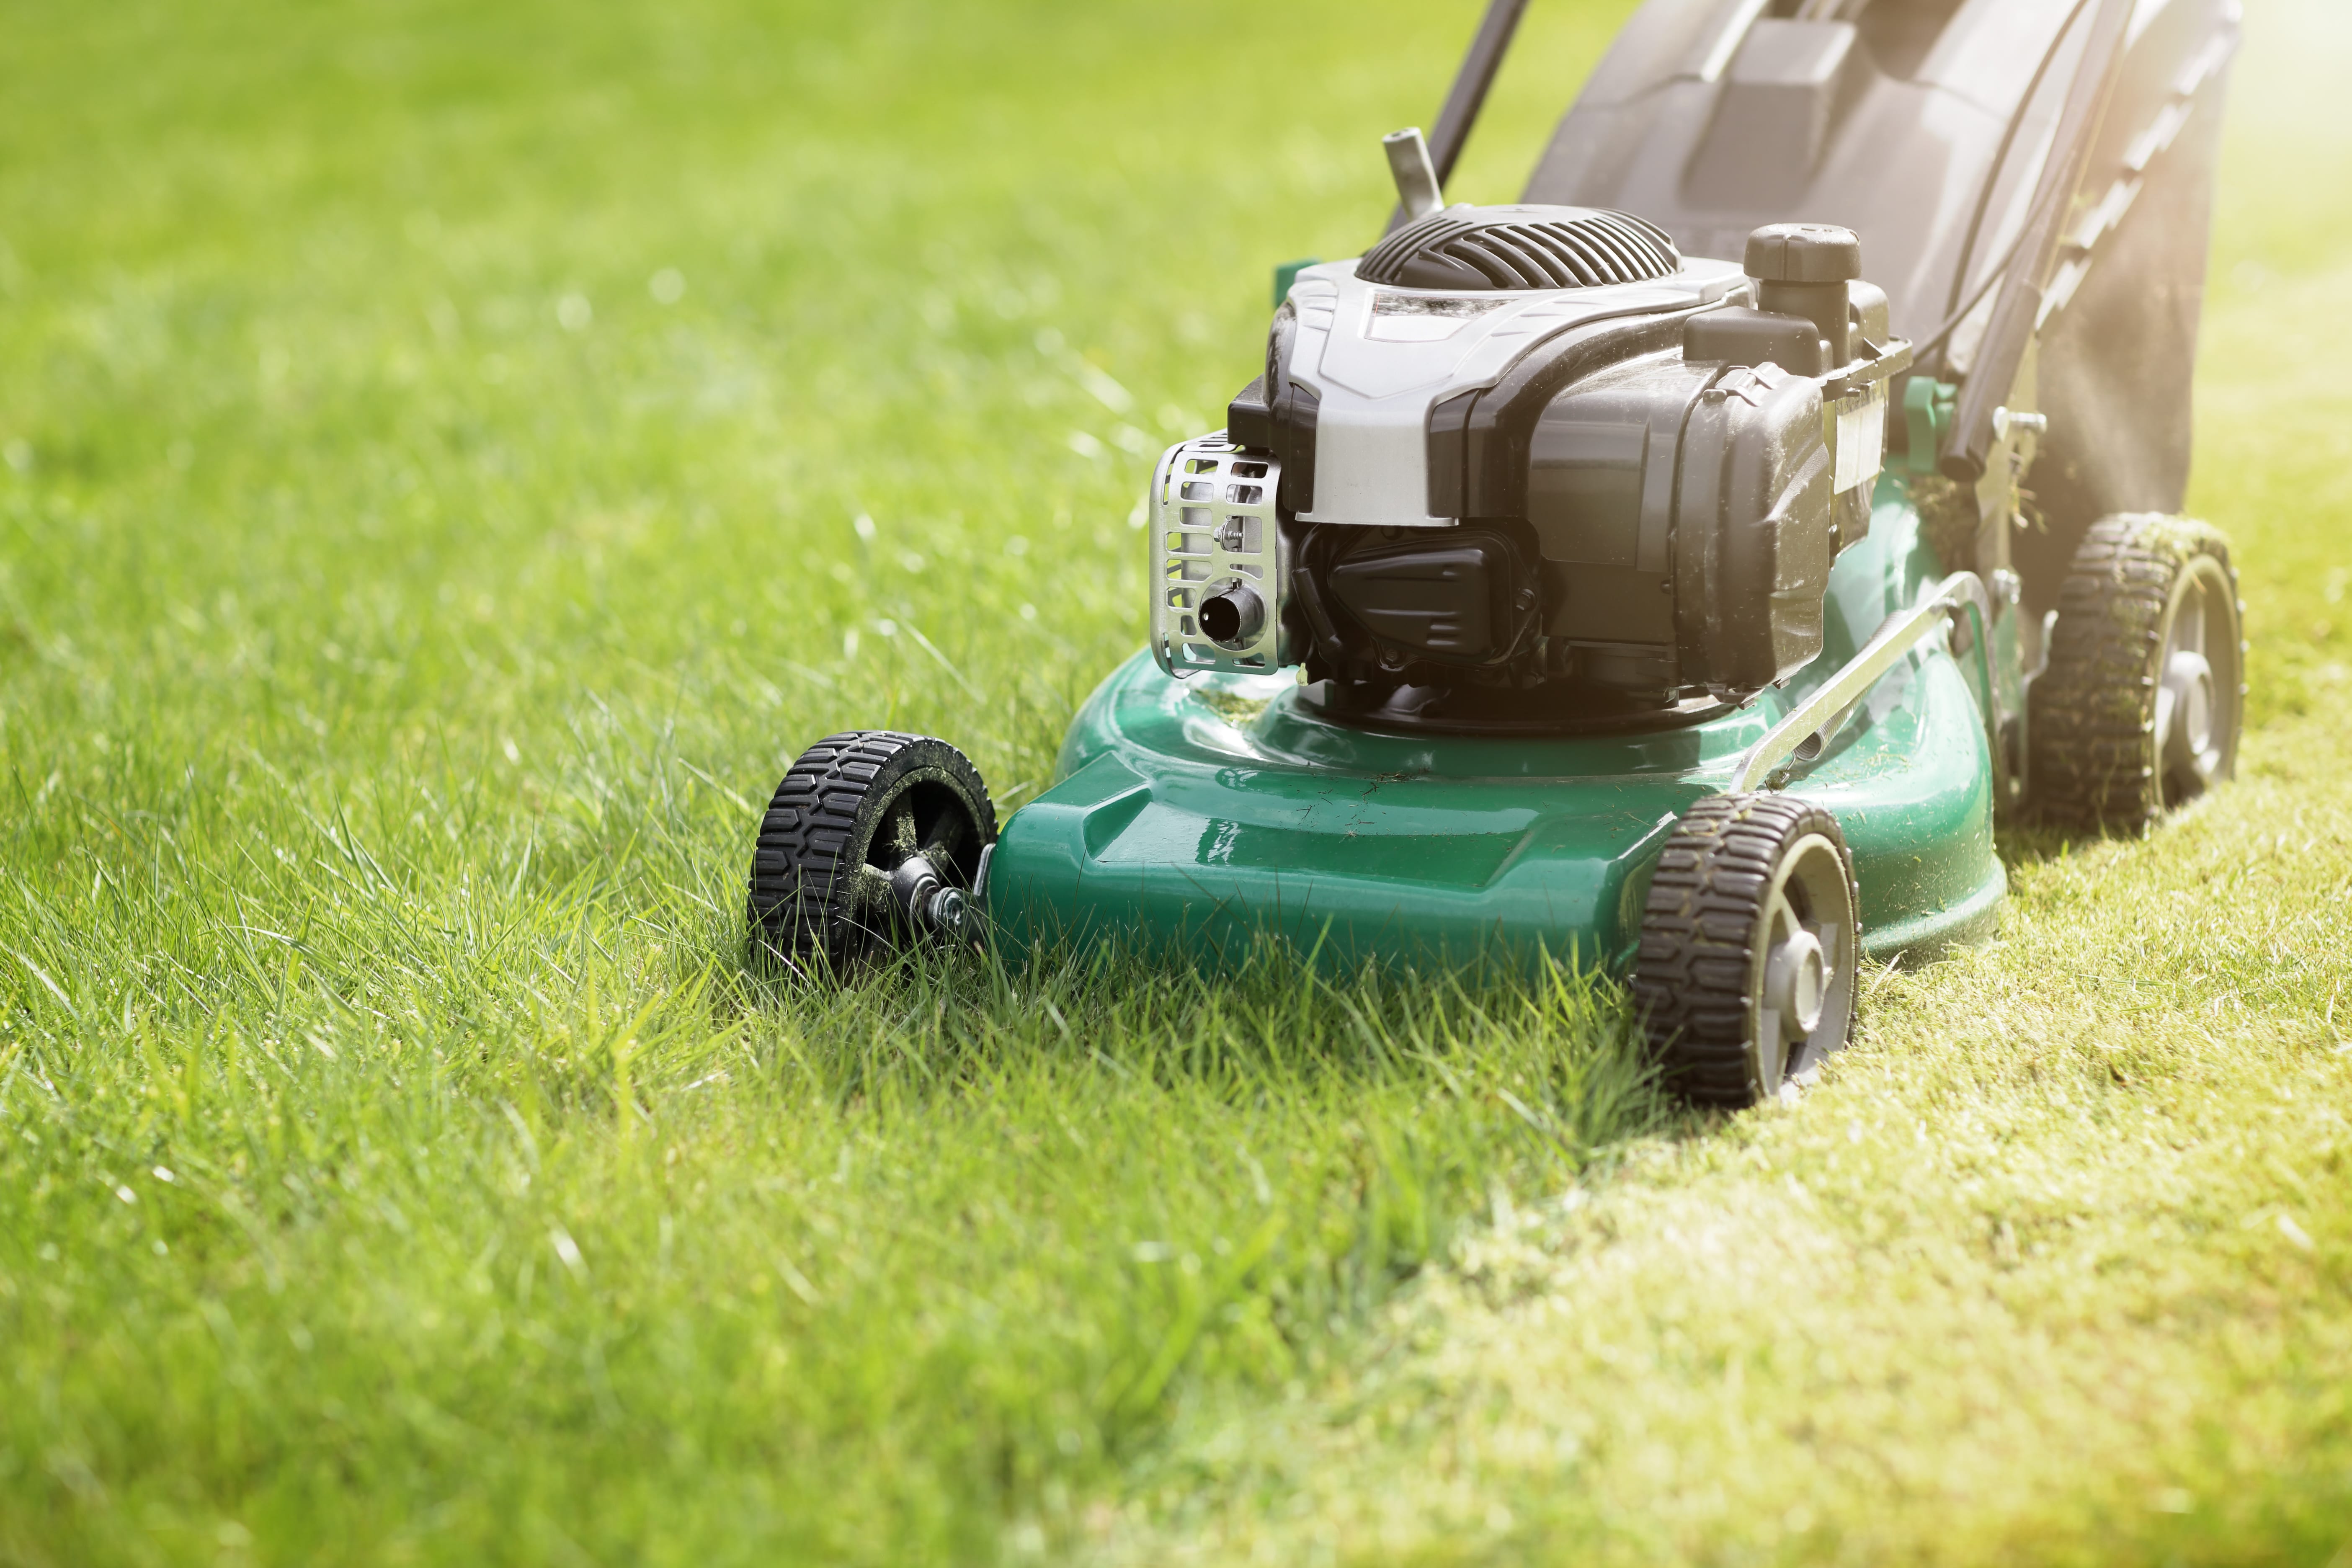 Mowing or cutting the long grass with a green lawn mower in the summer sun